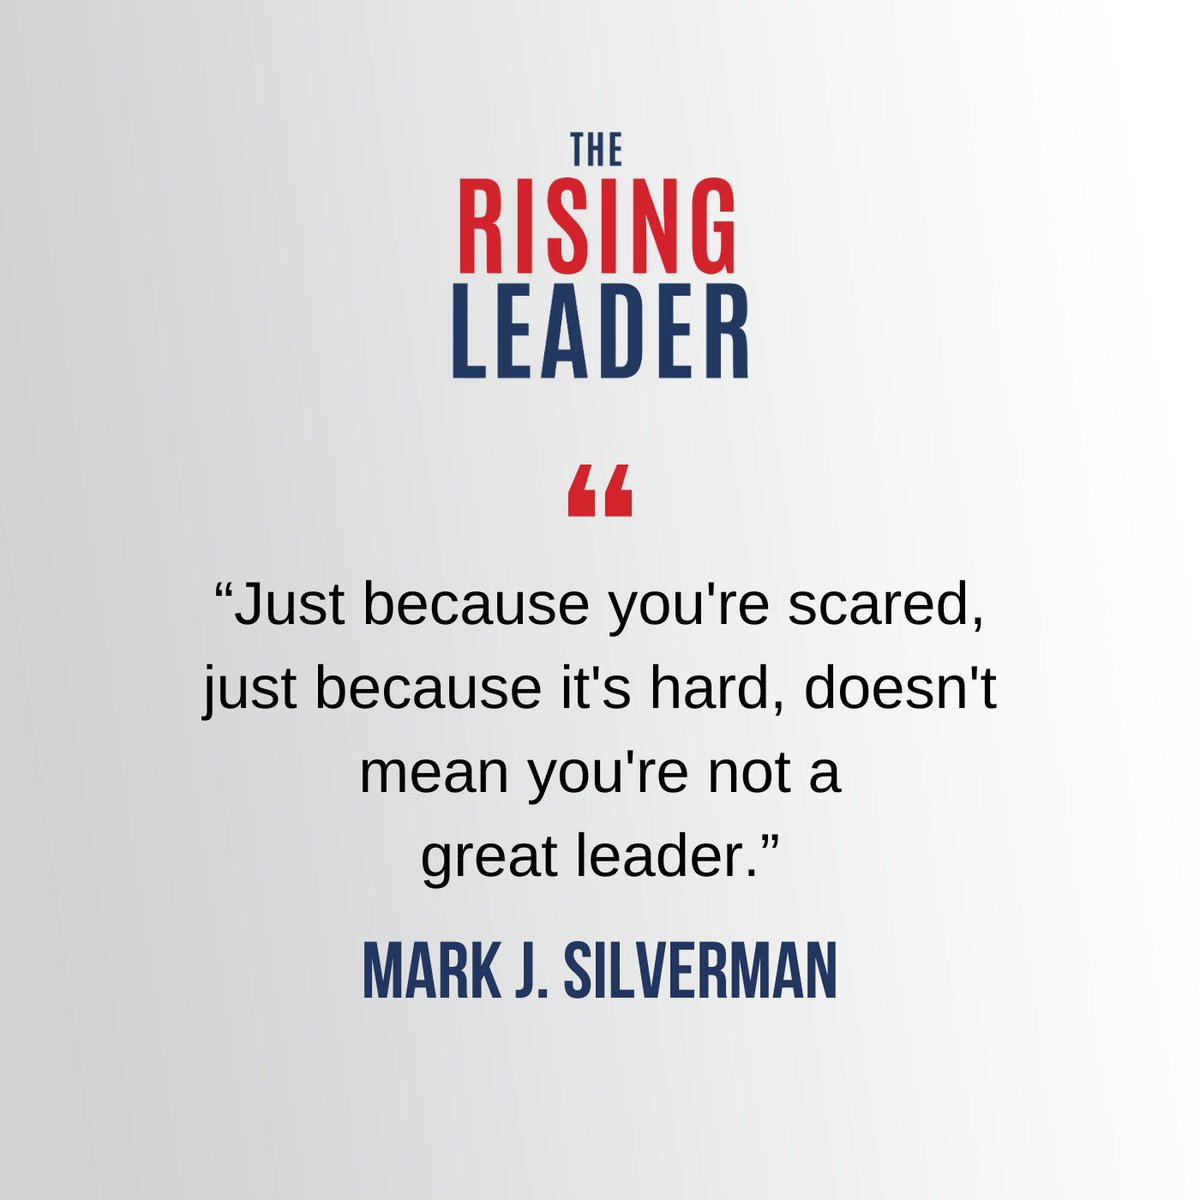 “Just because you're scared, just because it's hard, doesn't mean you're not a great leader.” - Mark Silverman on Episode 075 of Rising Leader

markjsilverman.com/podcast/ #TheRisingLeaderPodcast #leadership #podcast #podcaster #executivecoach #success